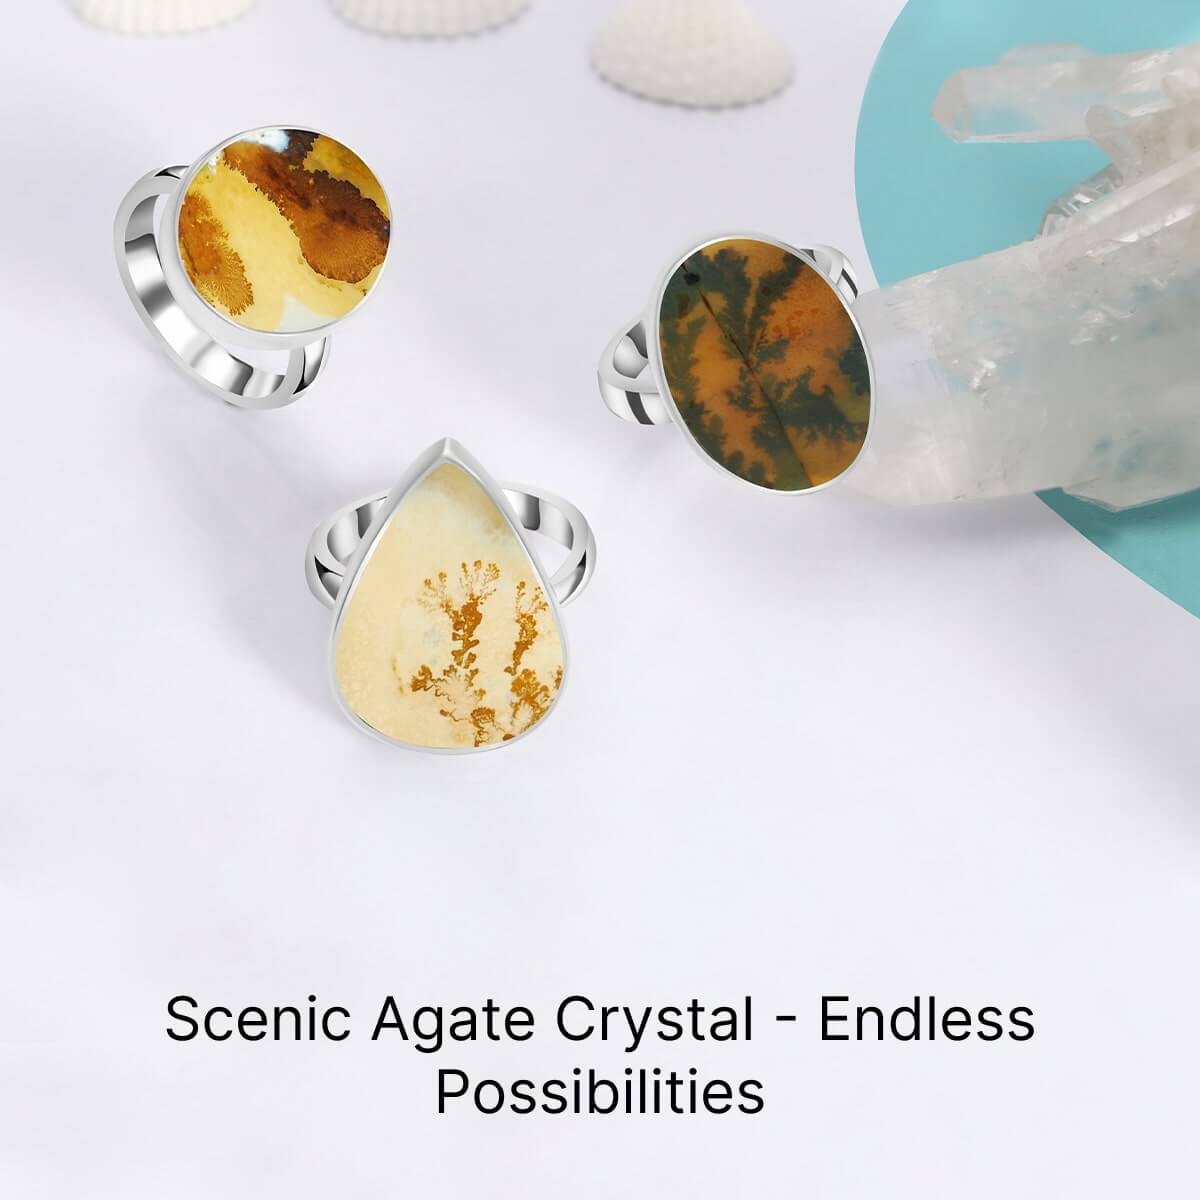 Uses of Scenic Agate Crystal